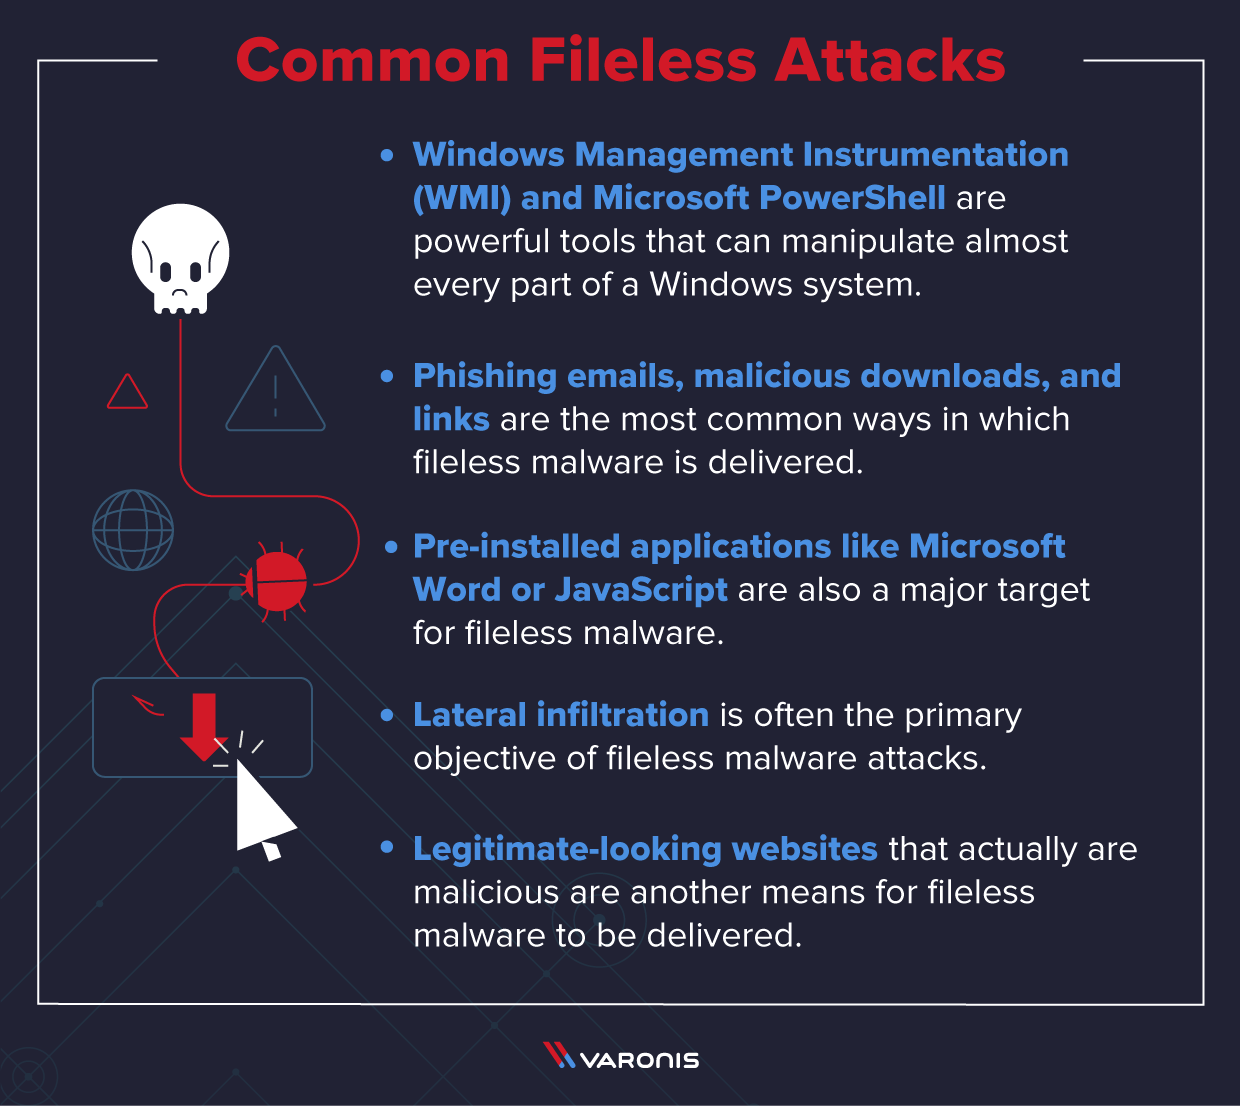 list of common fileless attacks and illustration of malicious hack